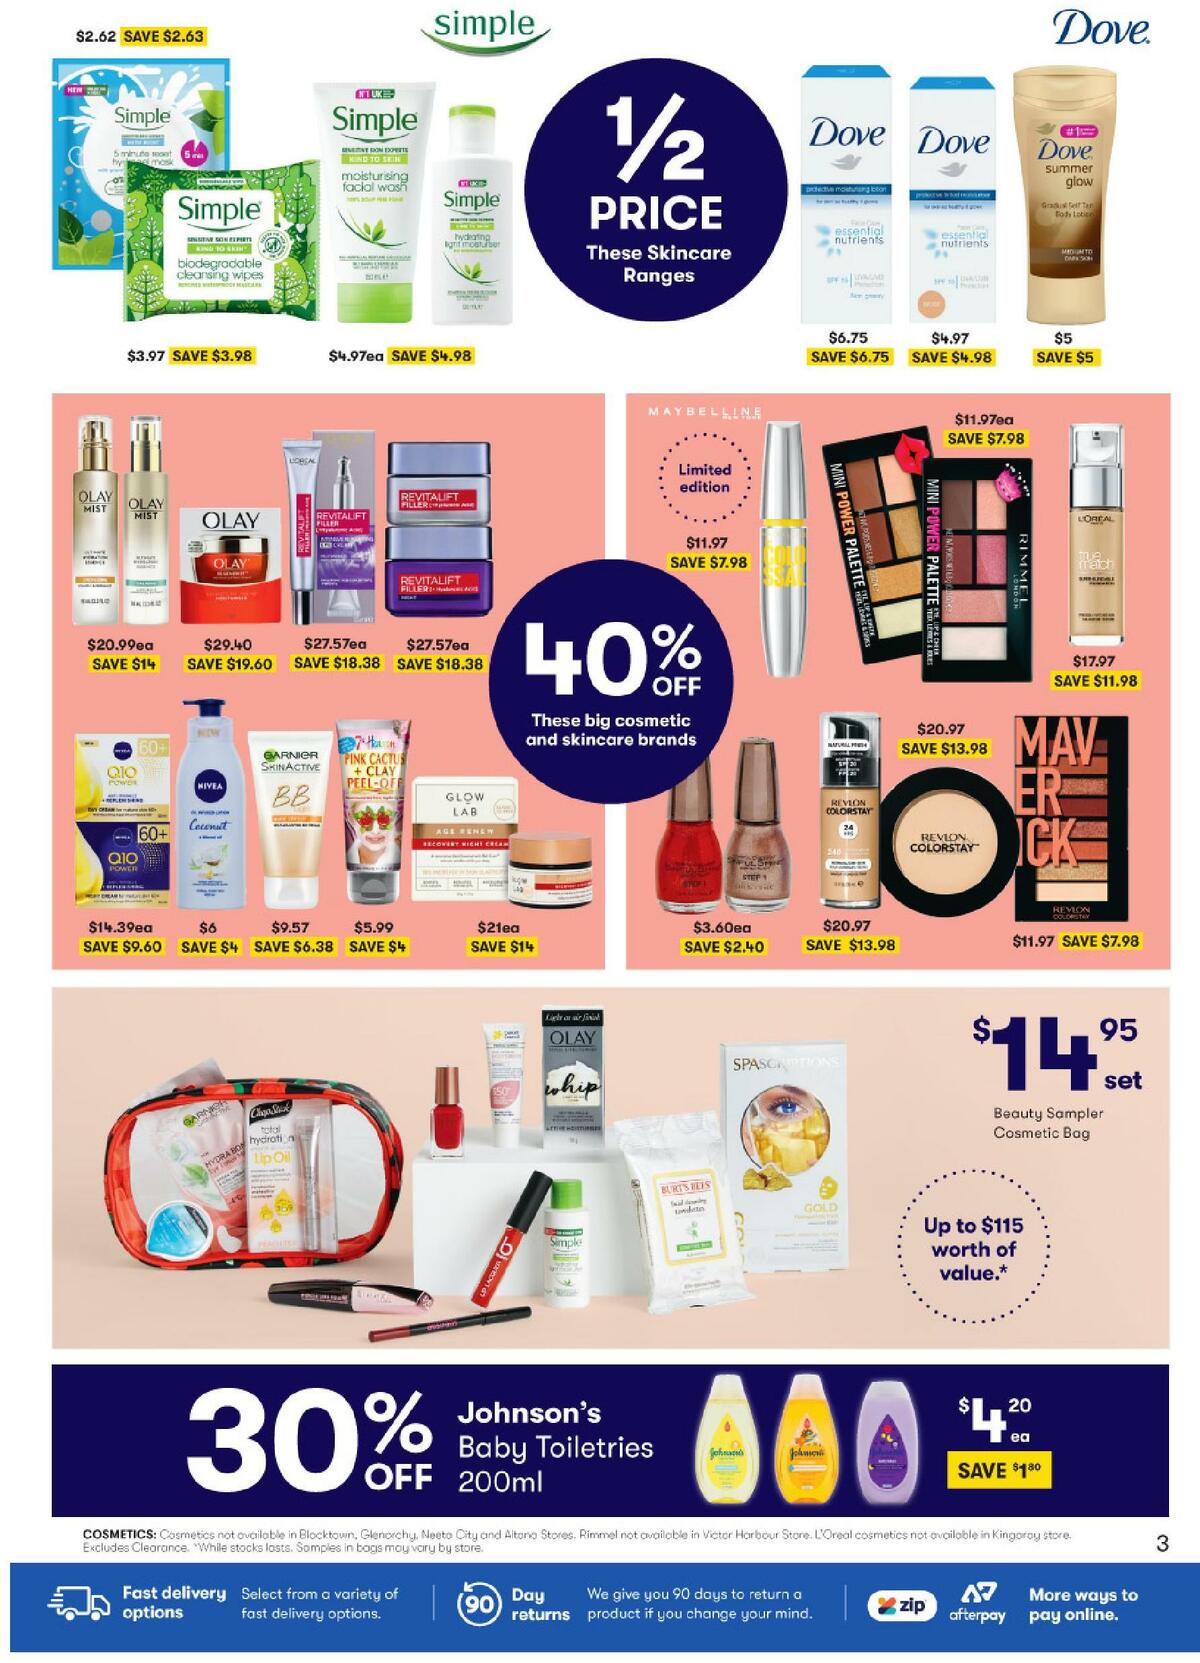 Big W Catalogues from 23 April